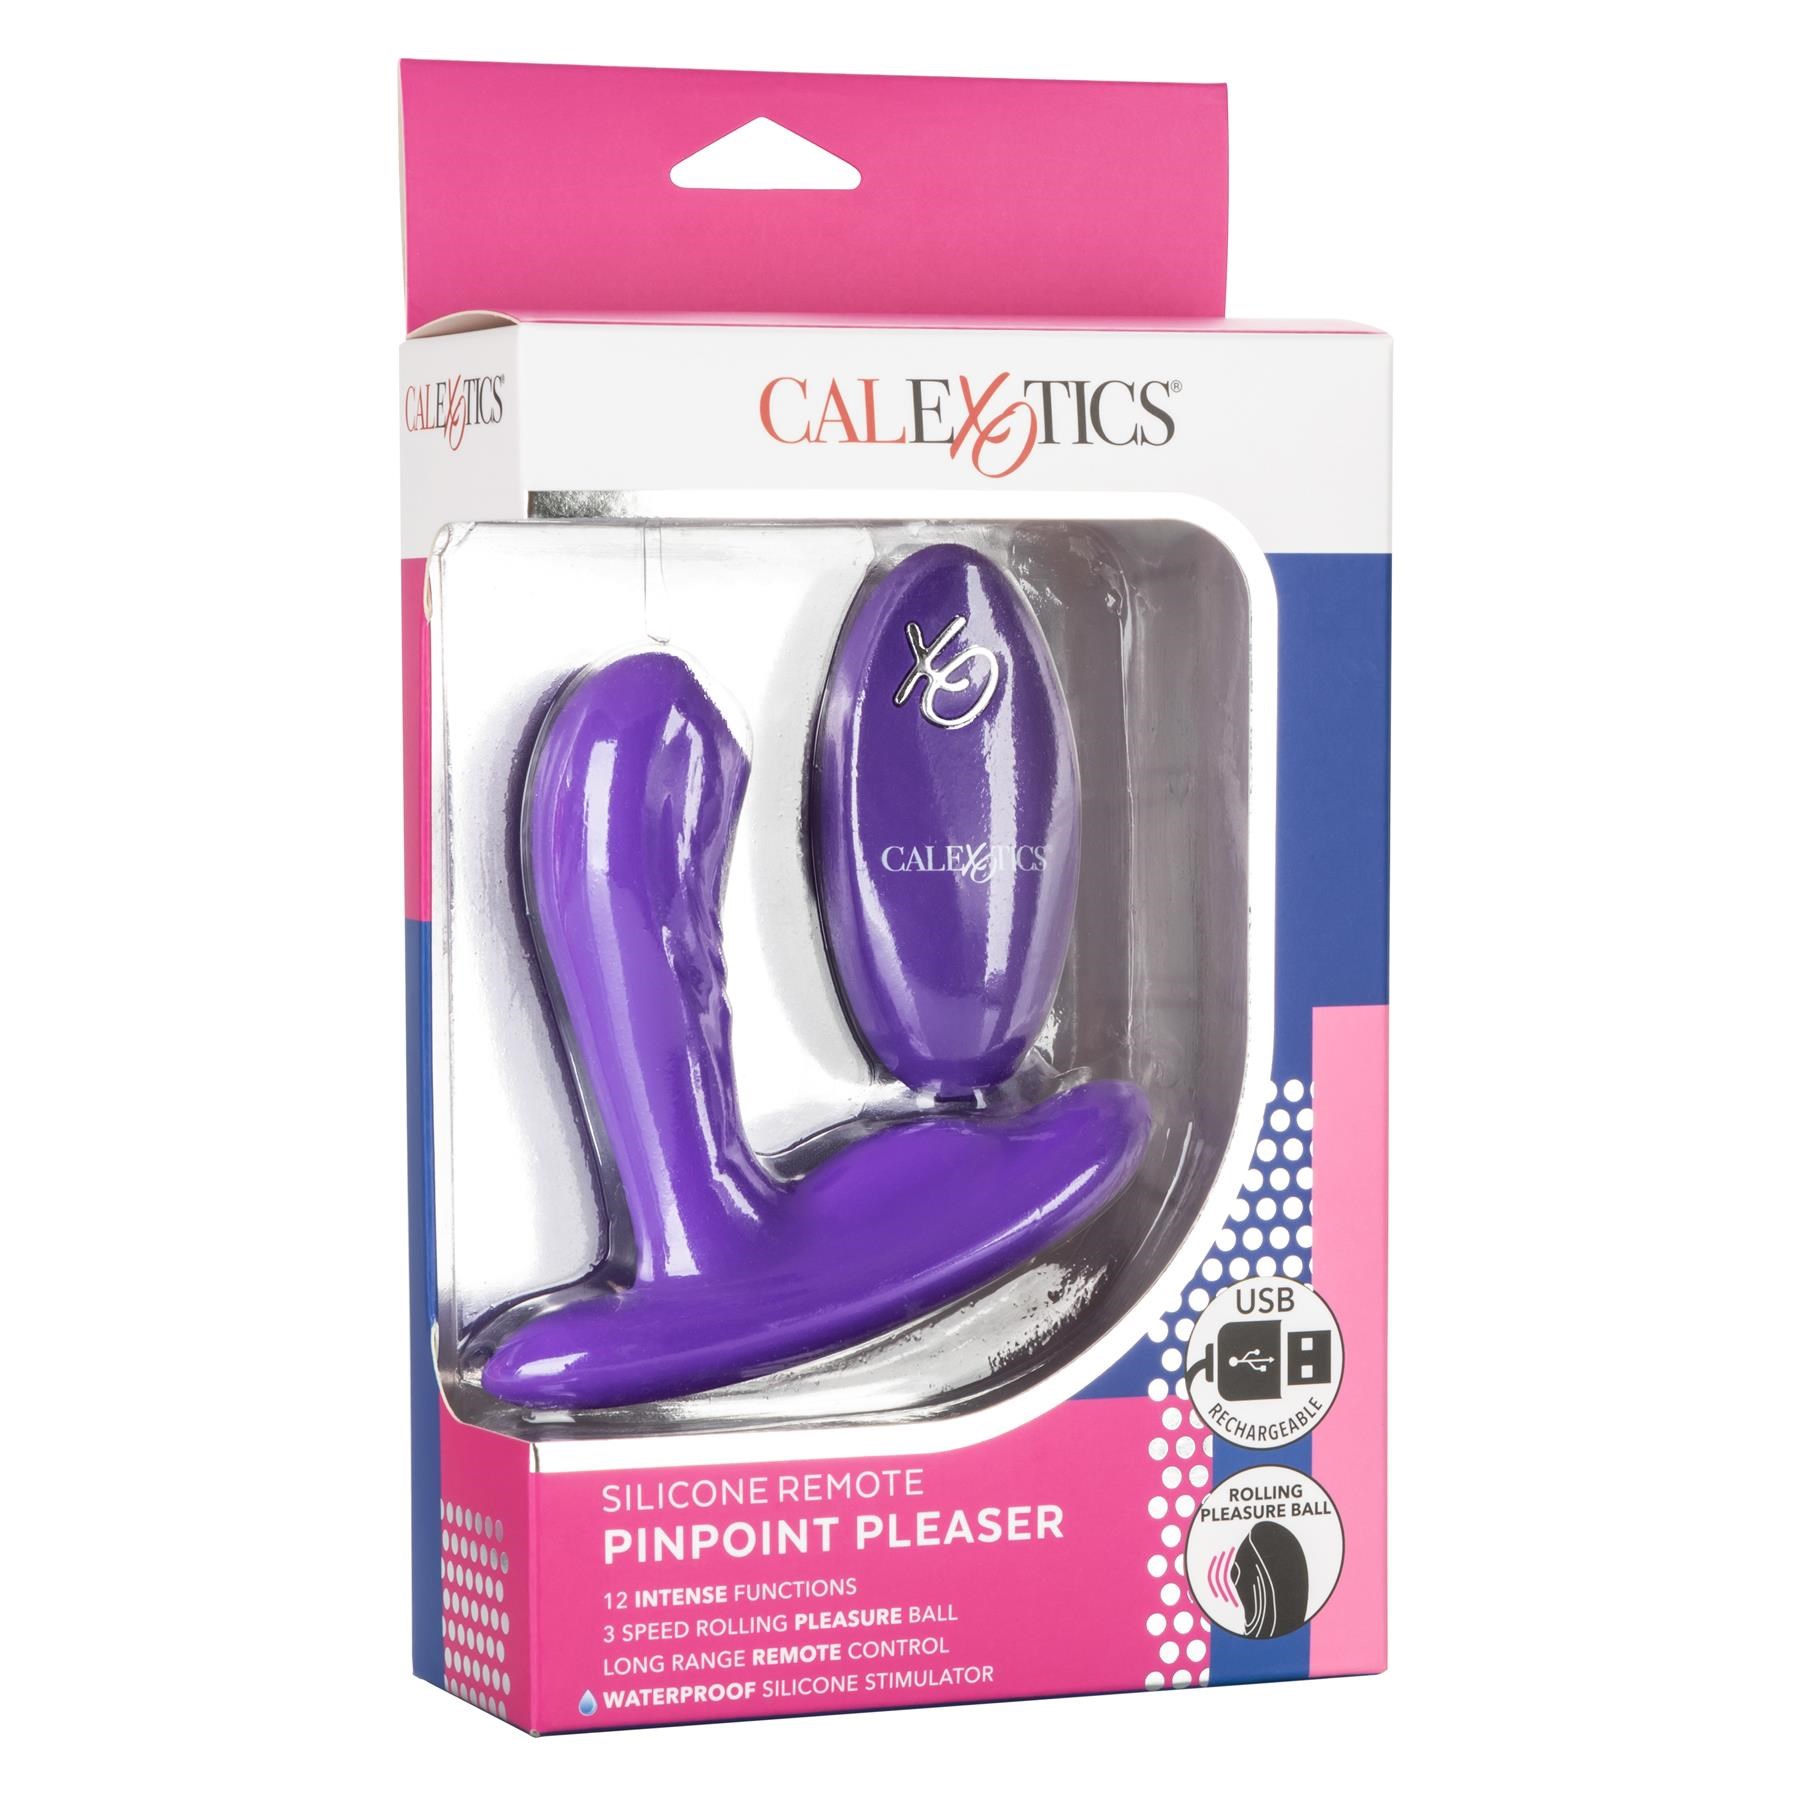 Silicone Remote Pinpoint Pleaser - Packaging - Front